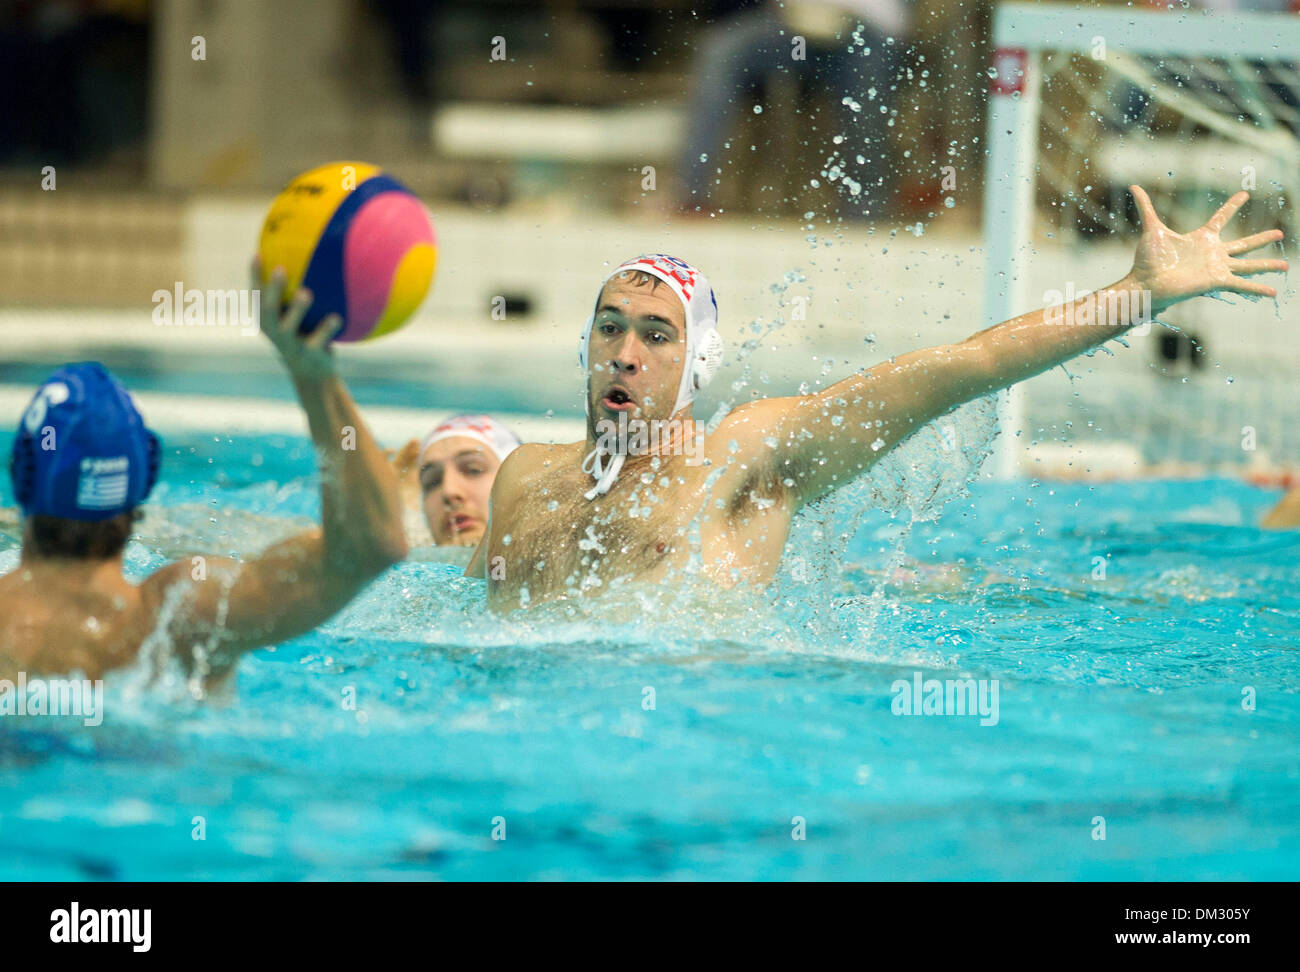 (131211) -- ZAGREB, December 11, 2013 (Xinhua) - Ivan Krapic of Croatia (1R) defends during the FINA Water Polo World League Group B match against Greece in Zagreb, Croatia, December 10, 2013. Greece won 12-11 after penalty shootout. (Xinhua/Miso Lisanin)(yt) Stock Photo